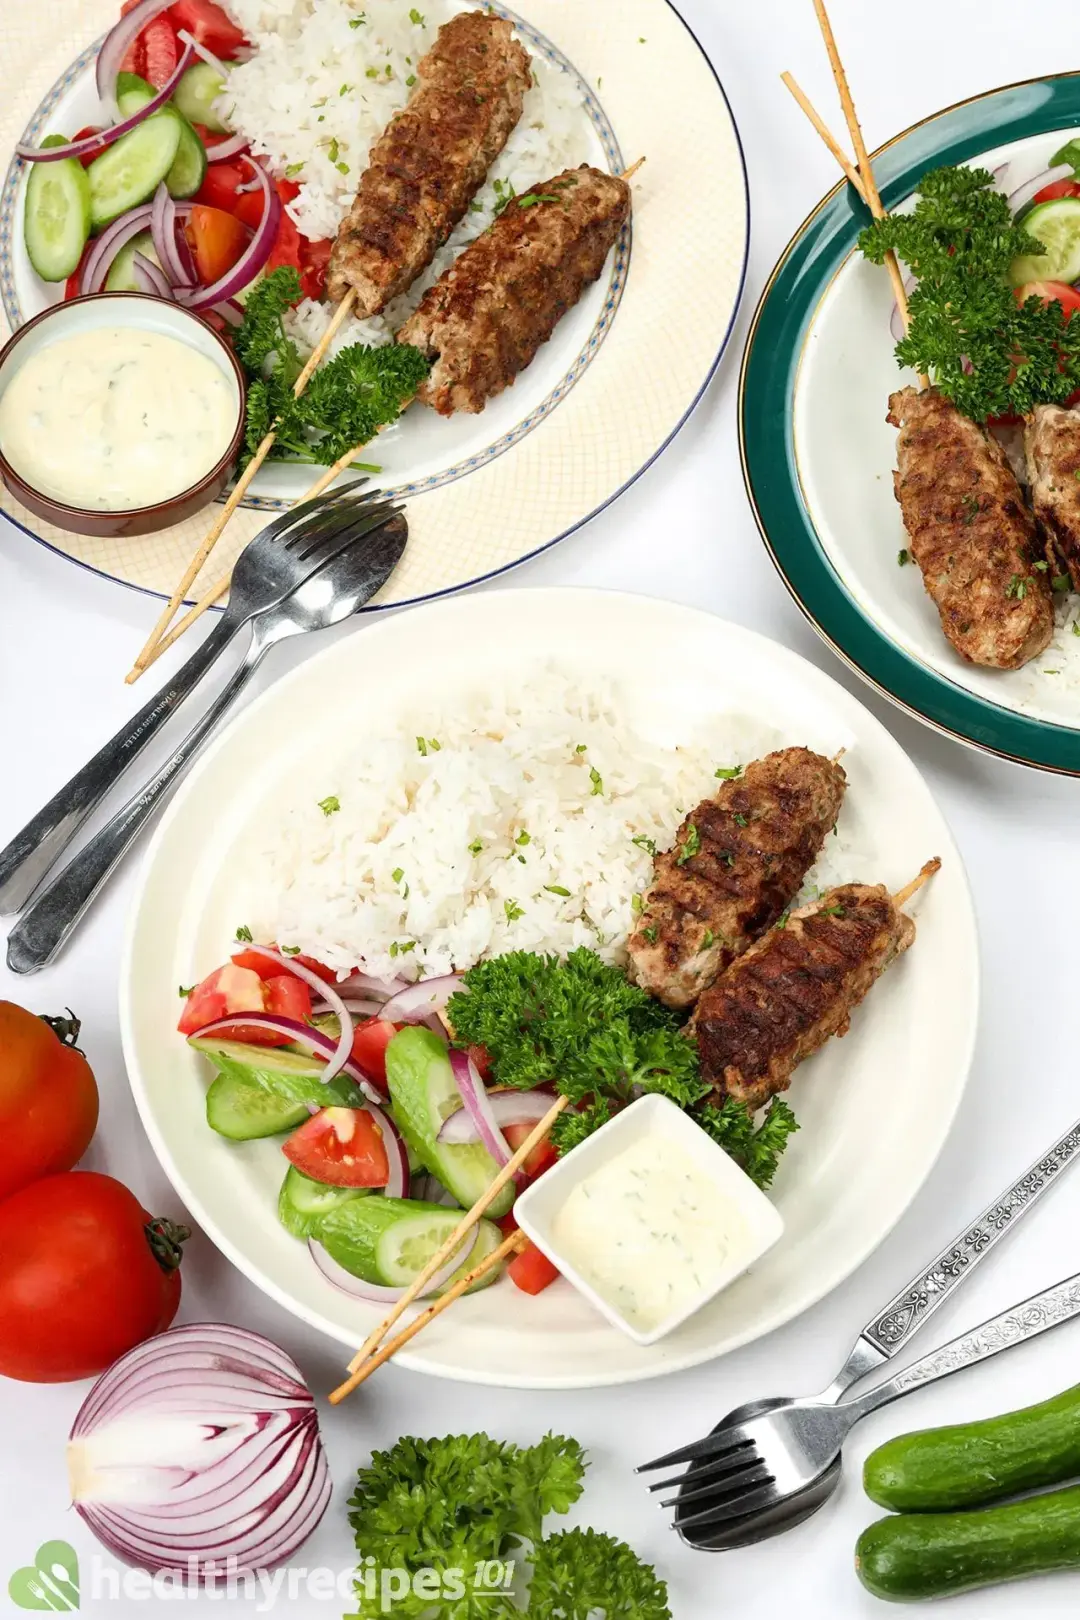 What to Serve With Beef Kofta